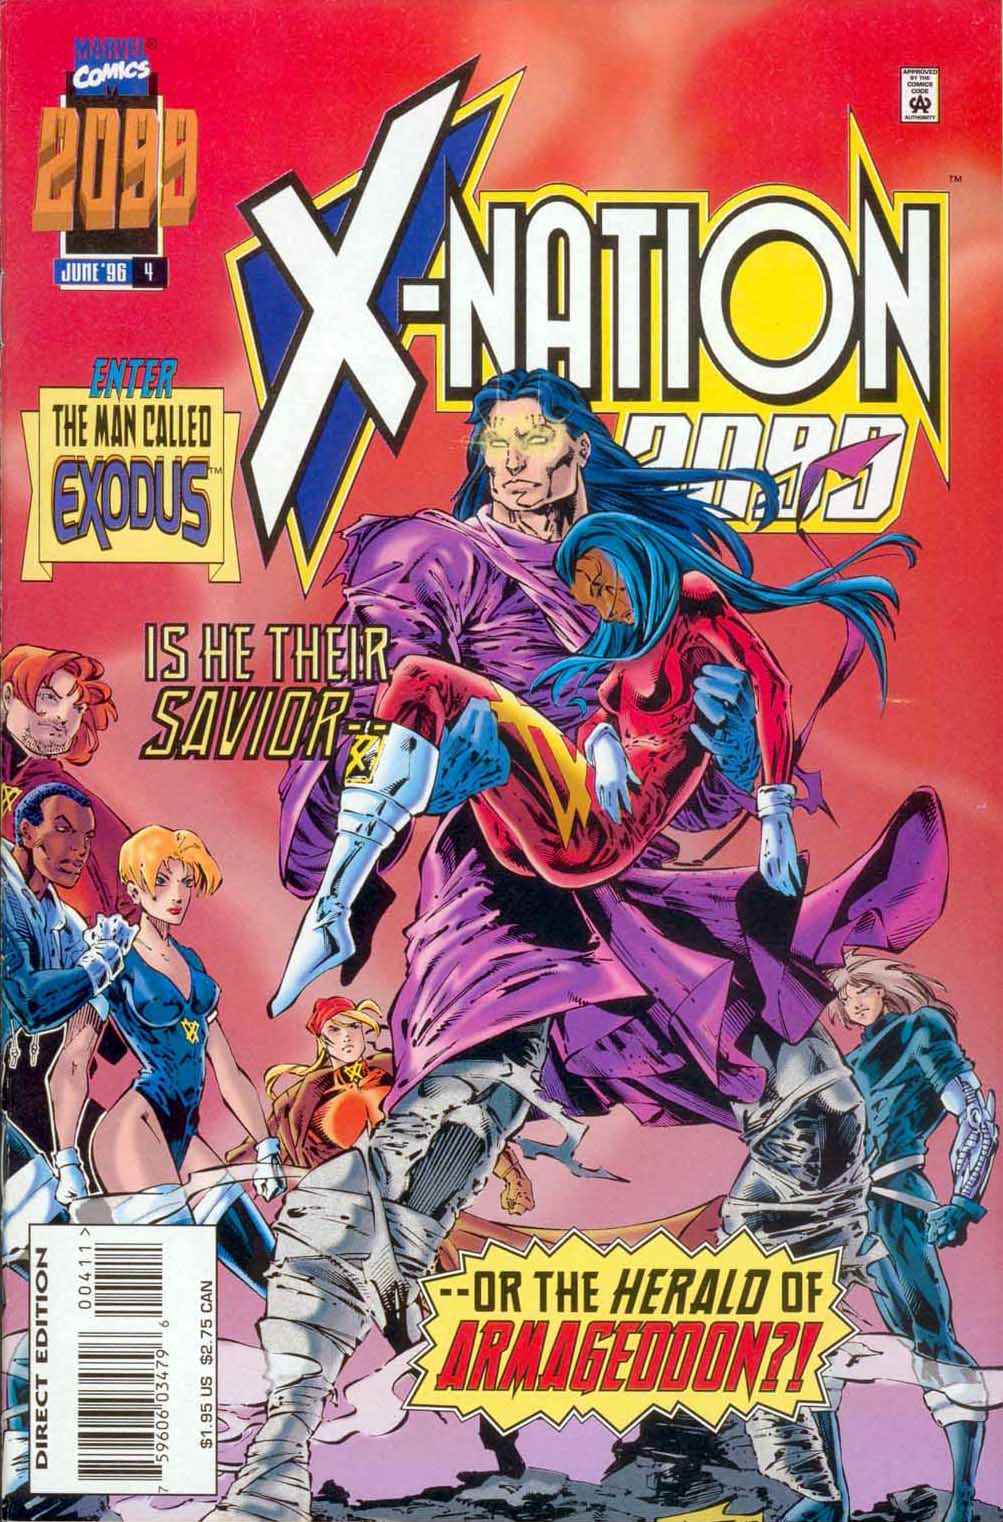 Read online X-Nation 2099 comic -  Issue #4 - 1